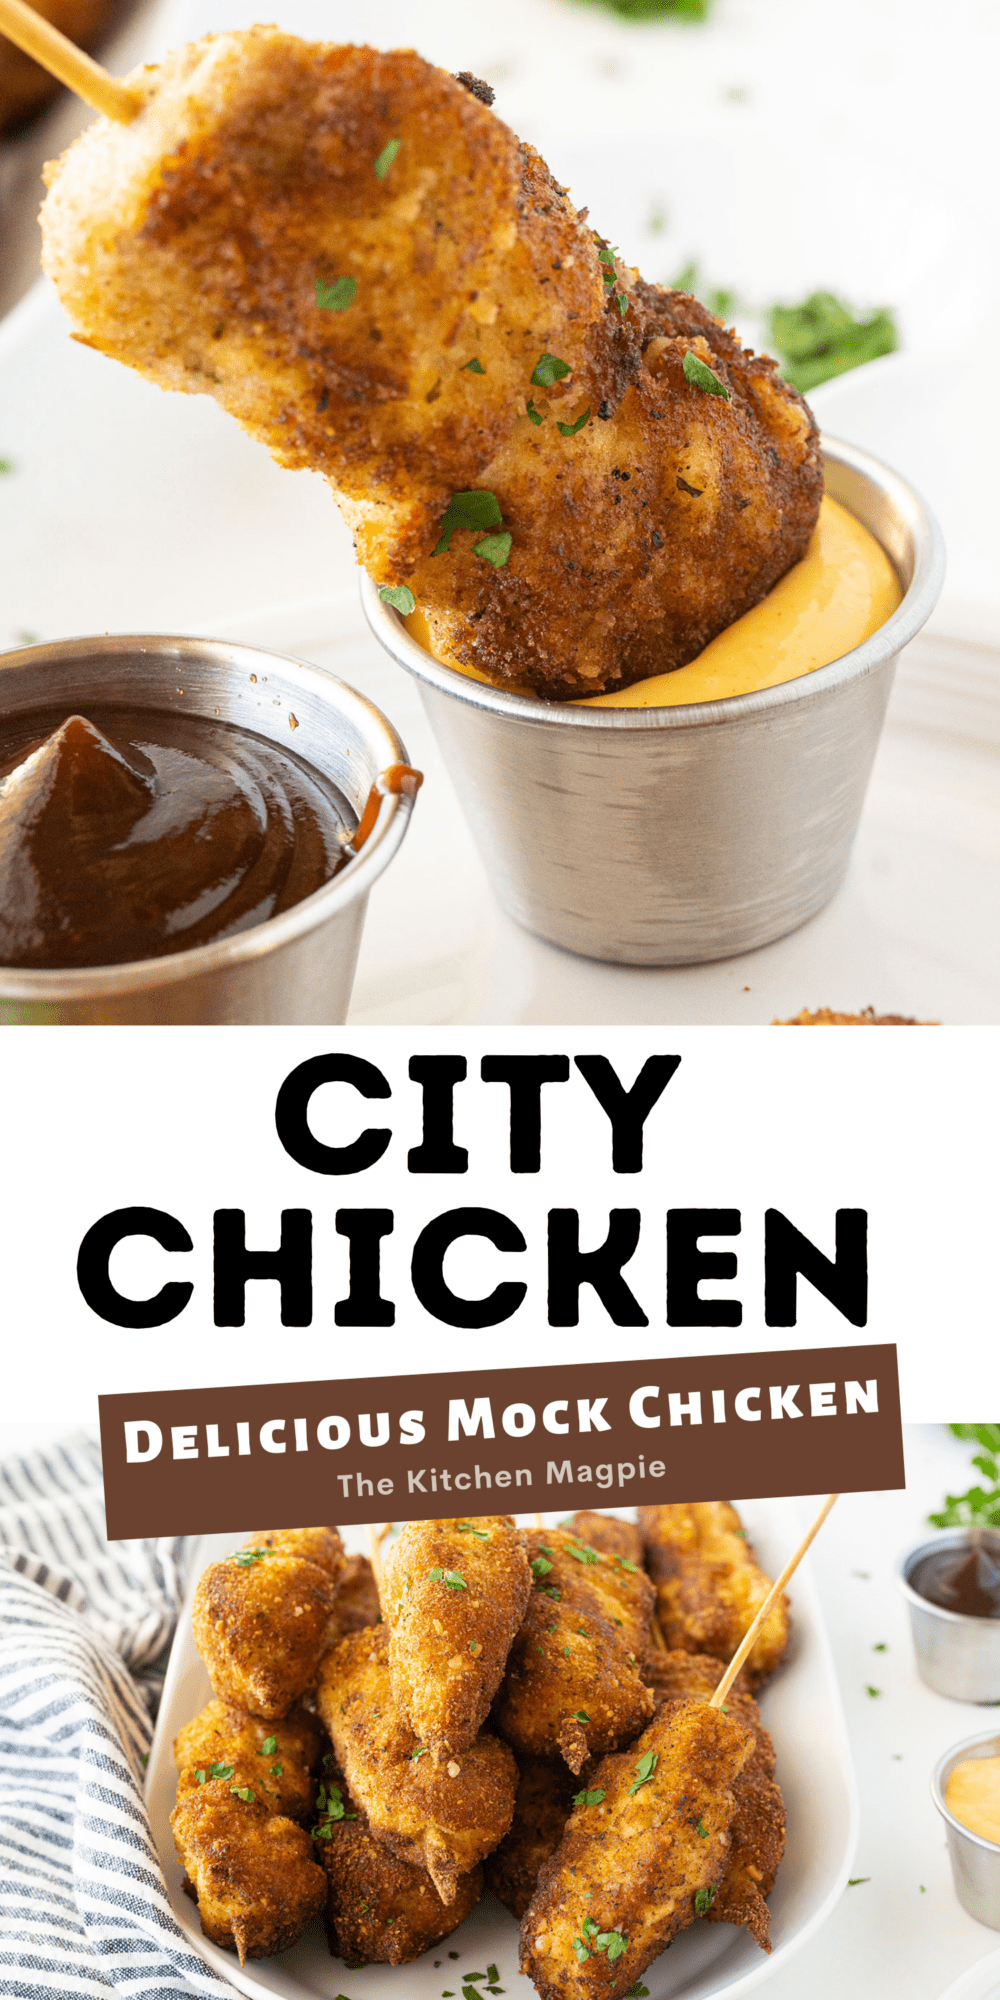 How to make City chicken! These mock chicken legs are a Depression-era recipe that uses pork instead of chicken, fried on skewers! Delicious!  